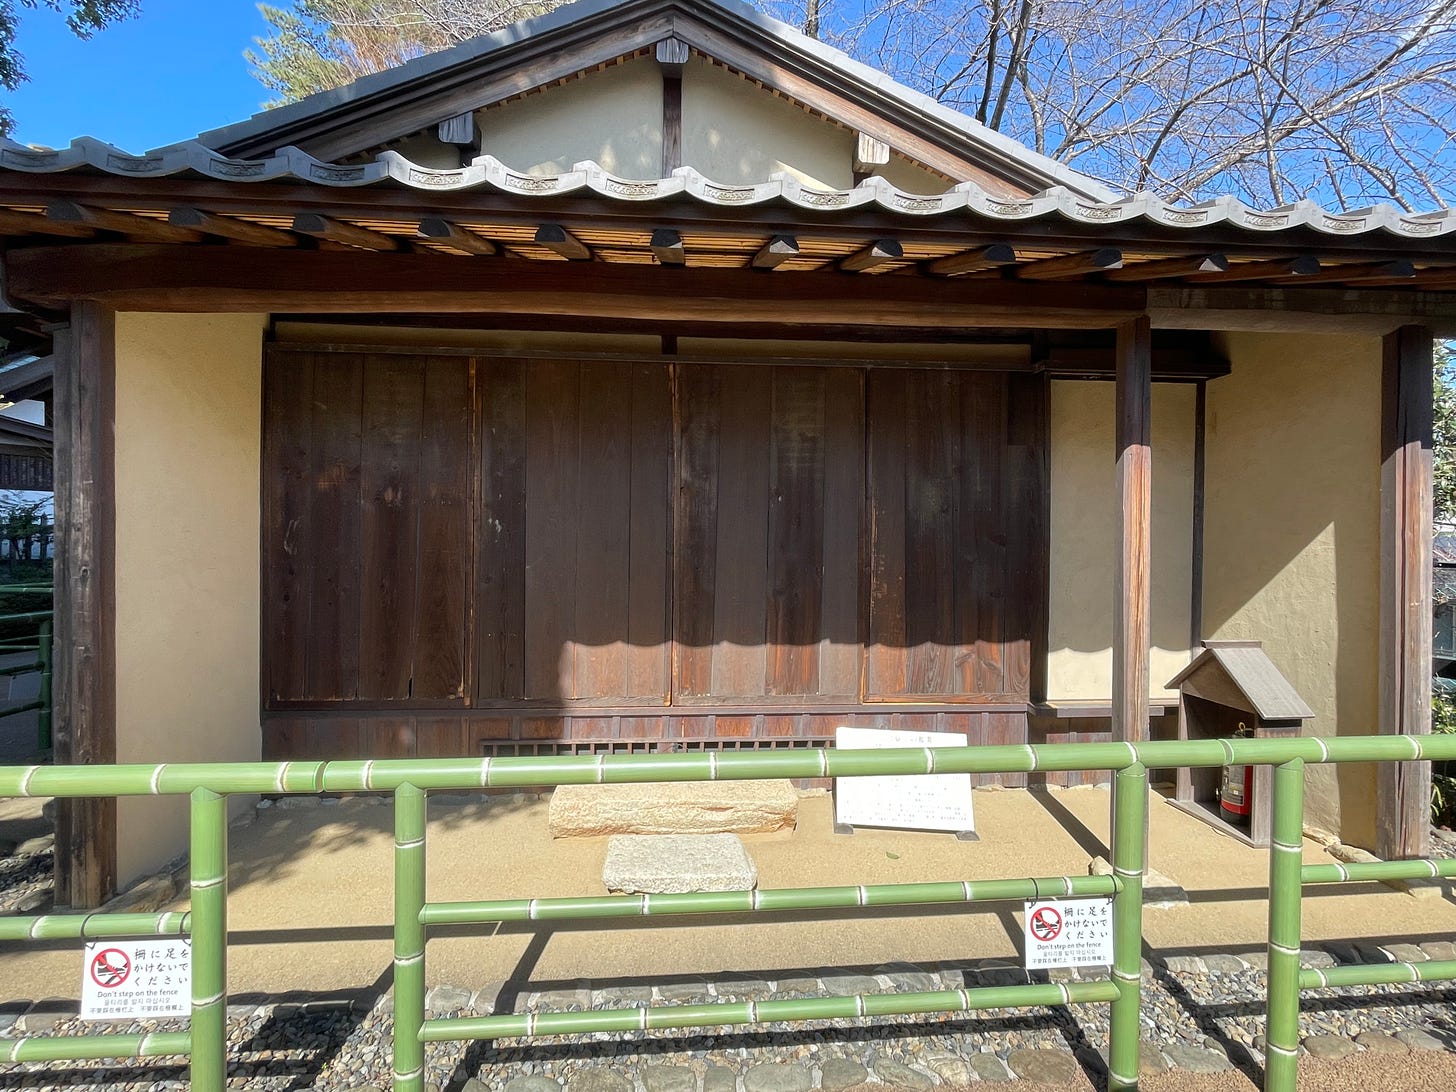 Replica of the house in Hagi (far western Japan). A simple one room school house. The doors were closed, so we didn't get to see inside.